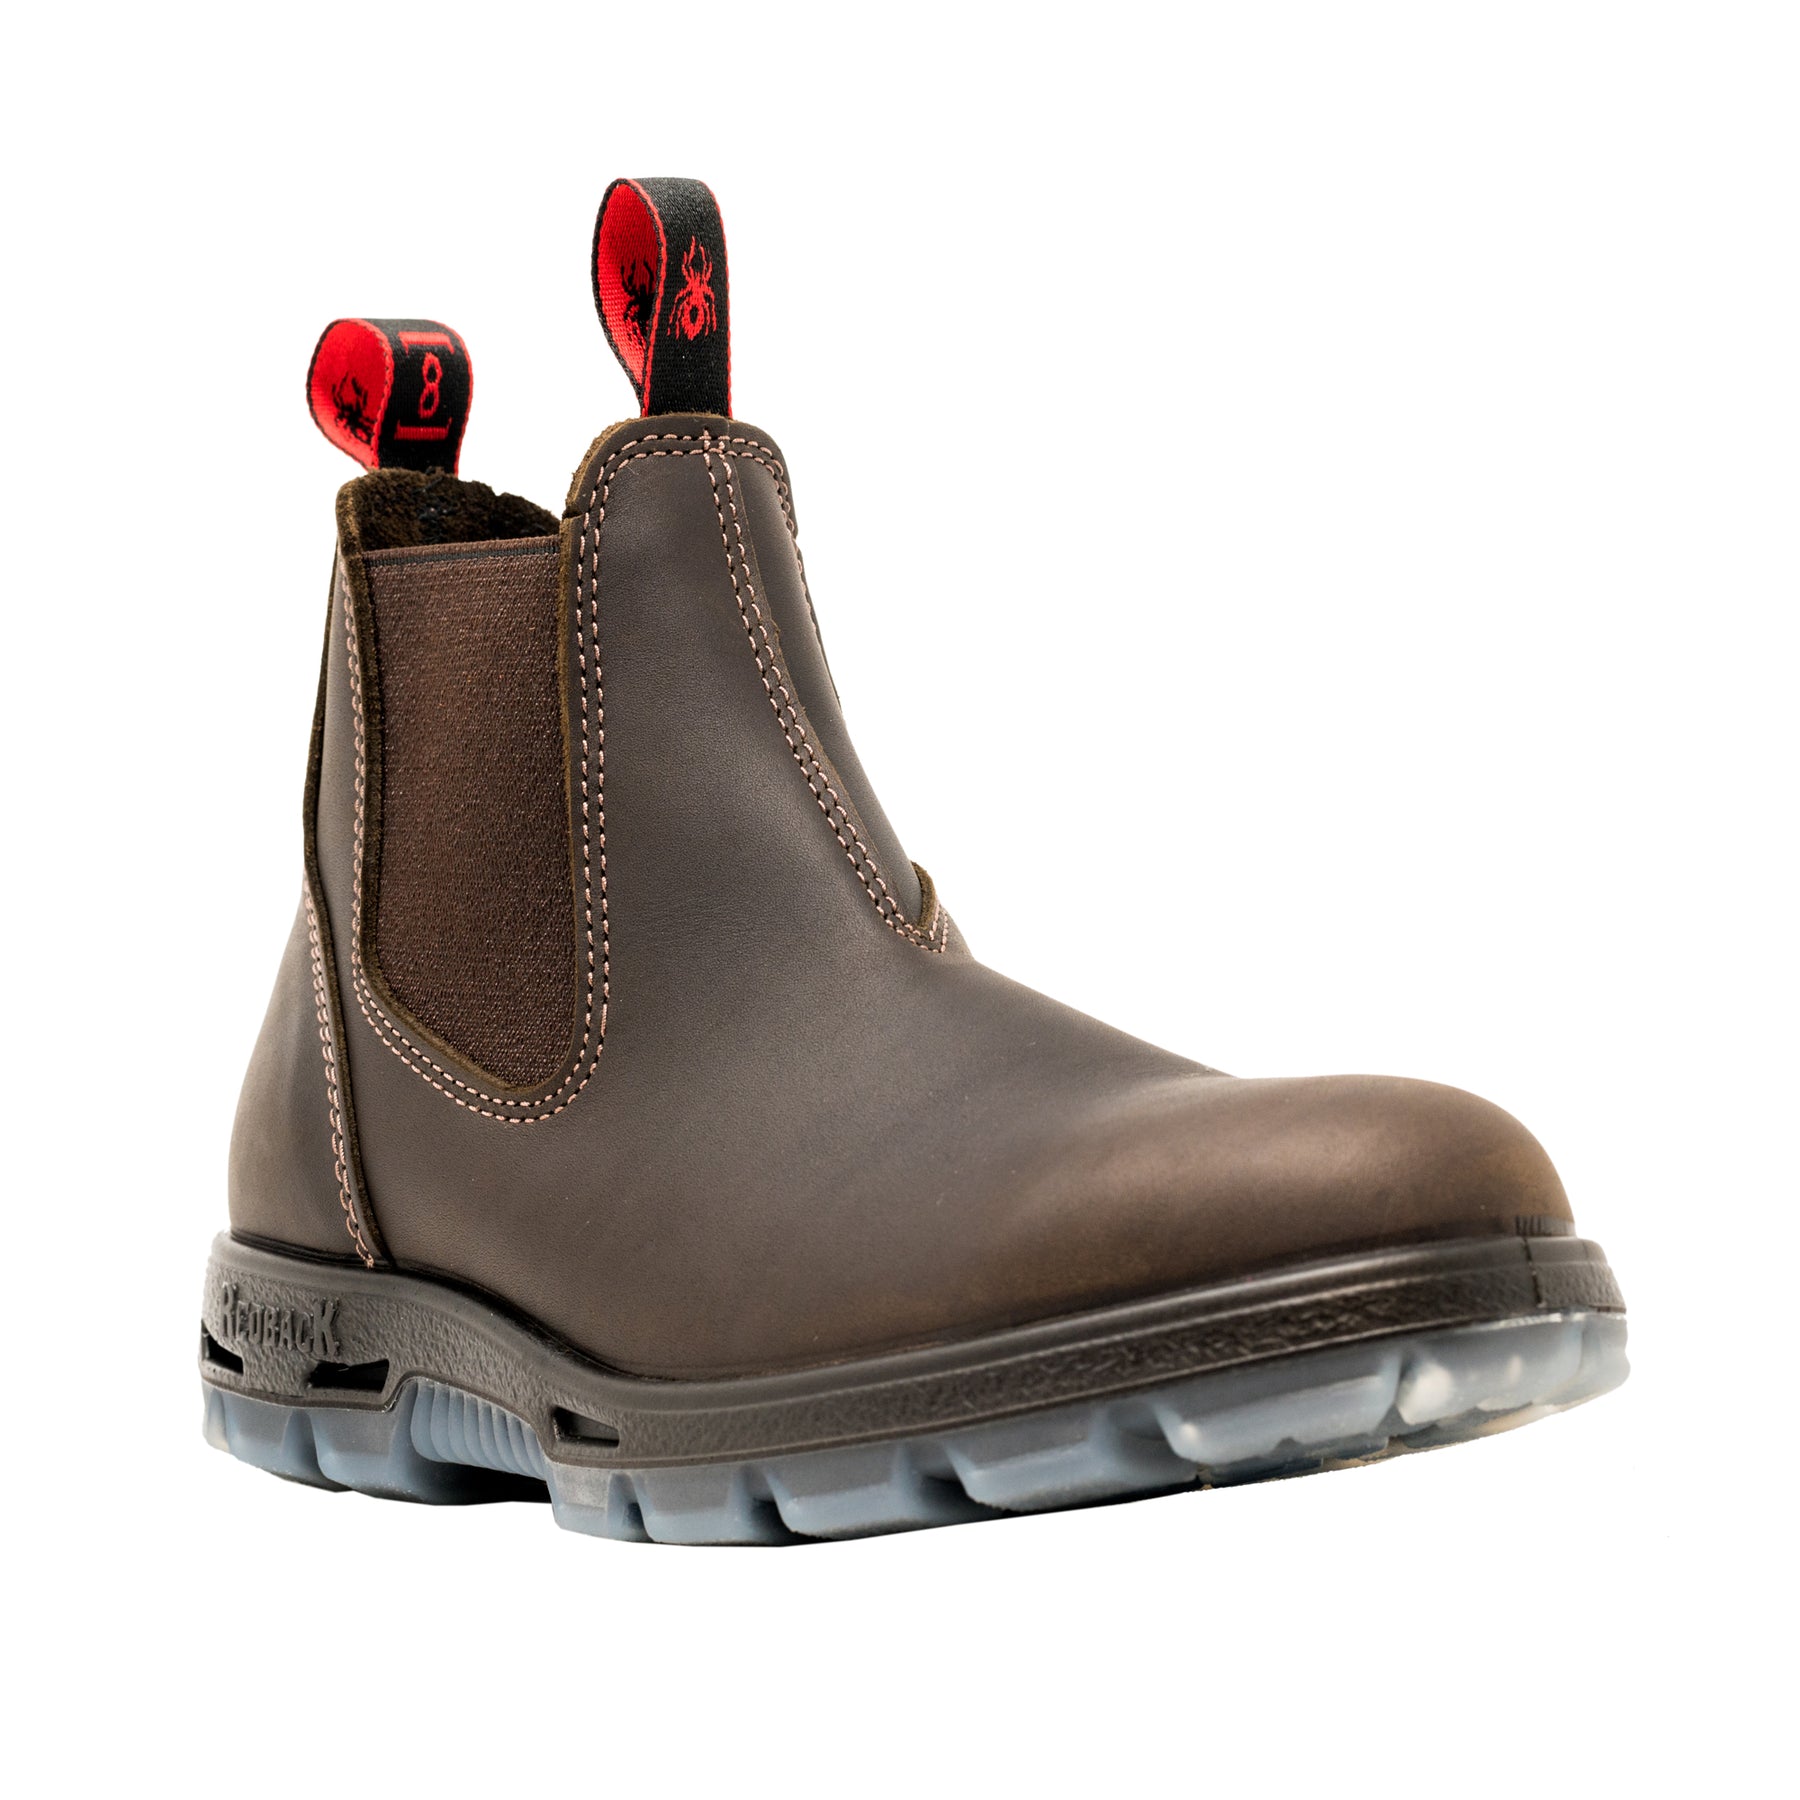 whistle workwear boots